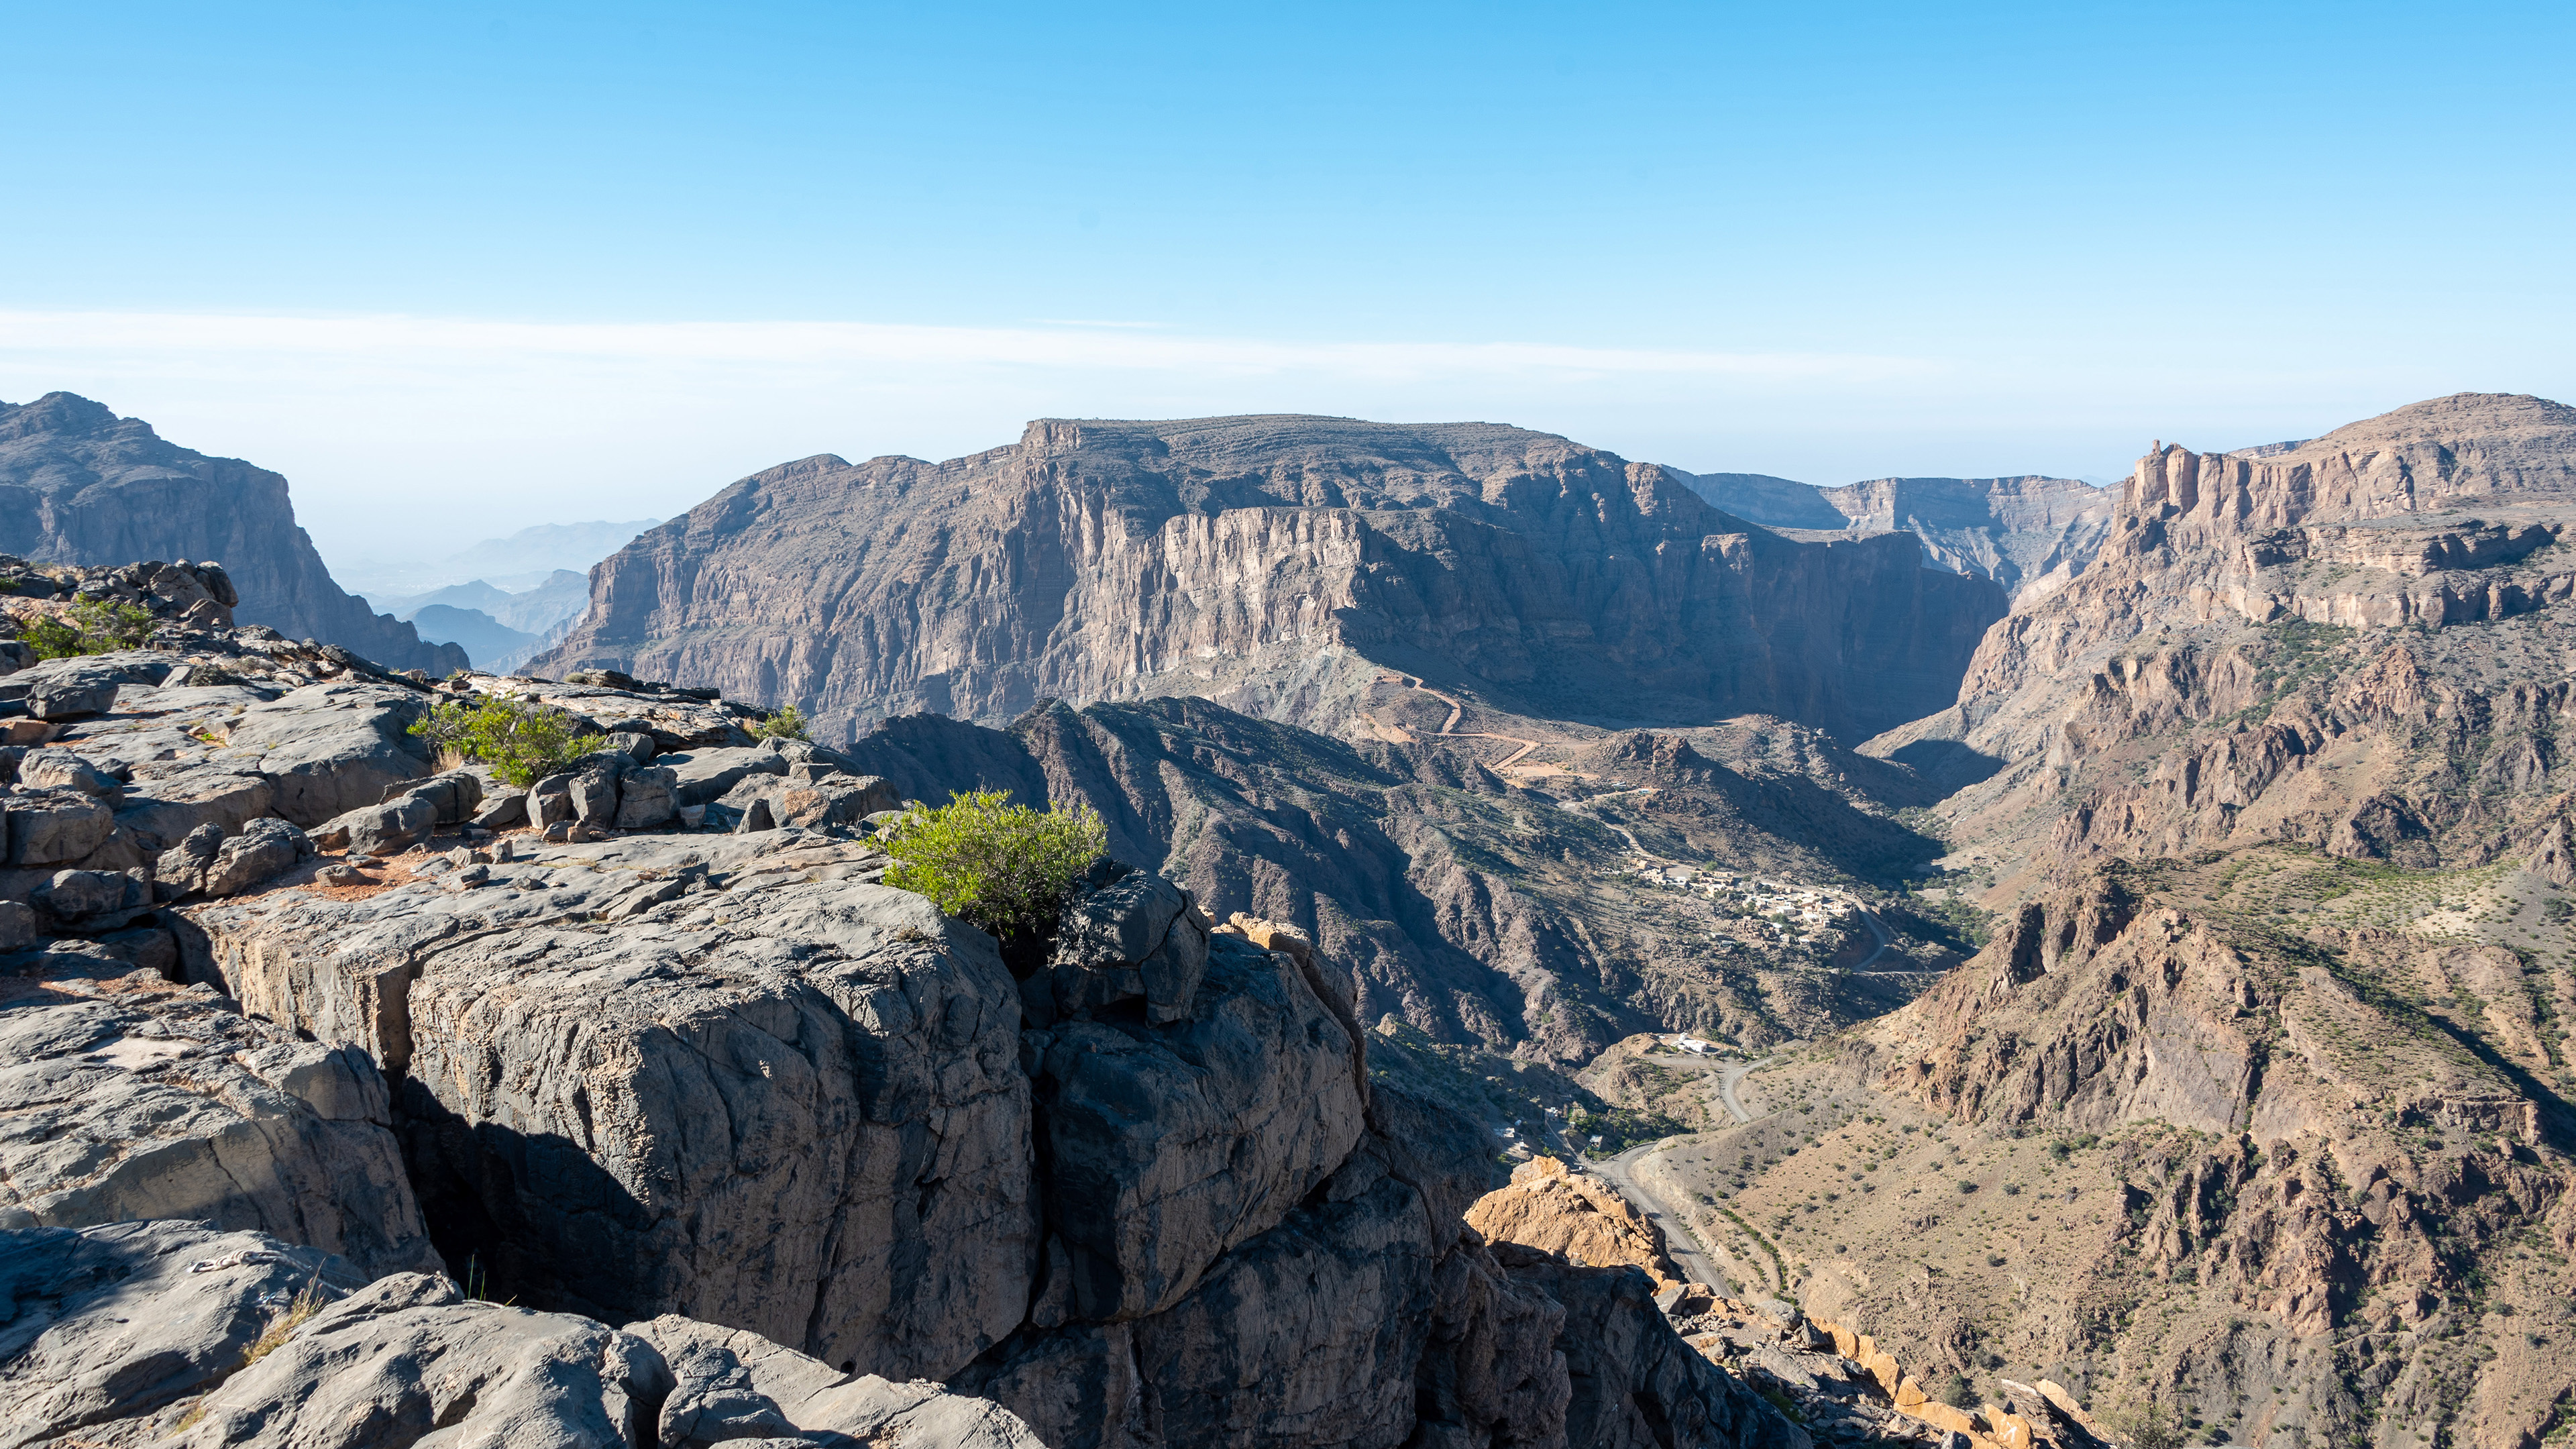 Oman: The 120th most populous country in the world, Bedrock. 3840x2160 4K Background.